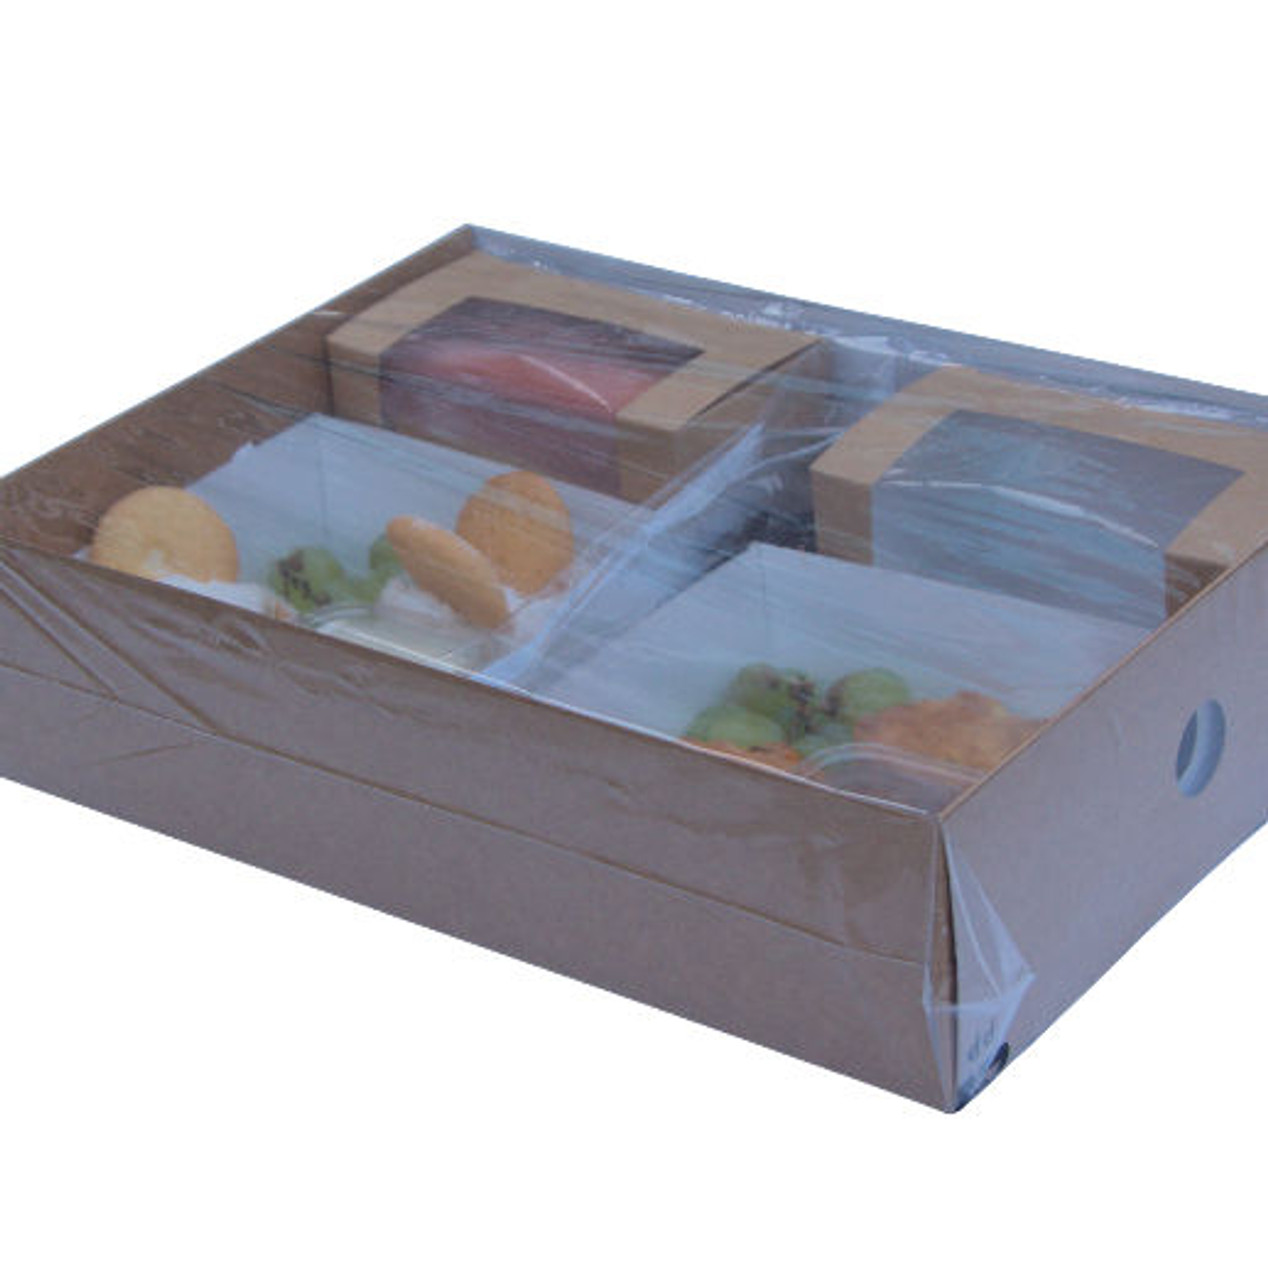 Pack of 5 Afternoon Tea / Picnic TRAY for 2 includes Sandwich boxes, Trays, Cutlery, portion pots and Self Seal Bag